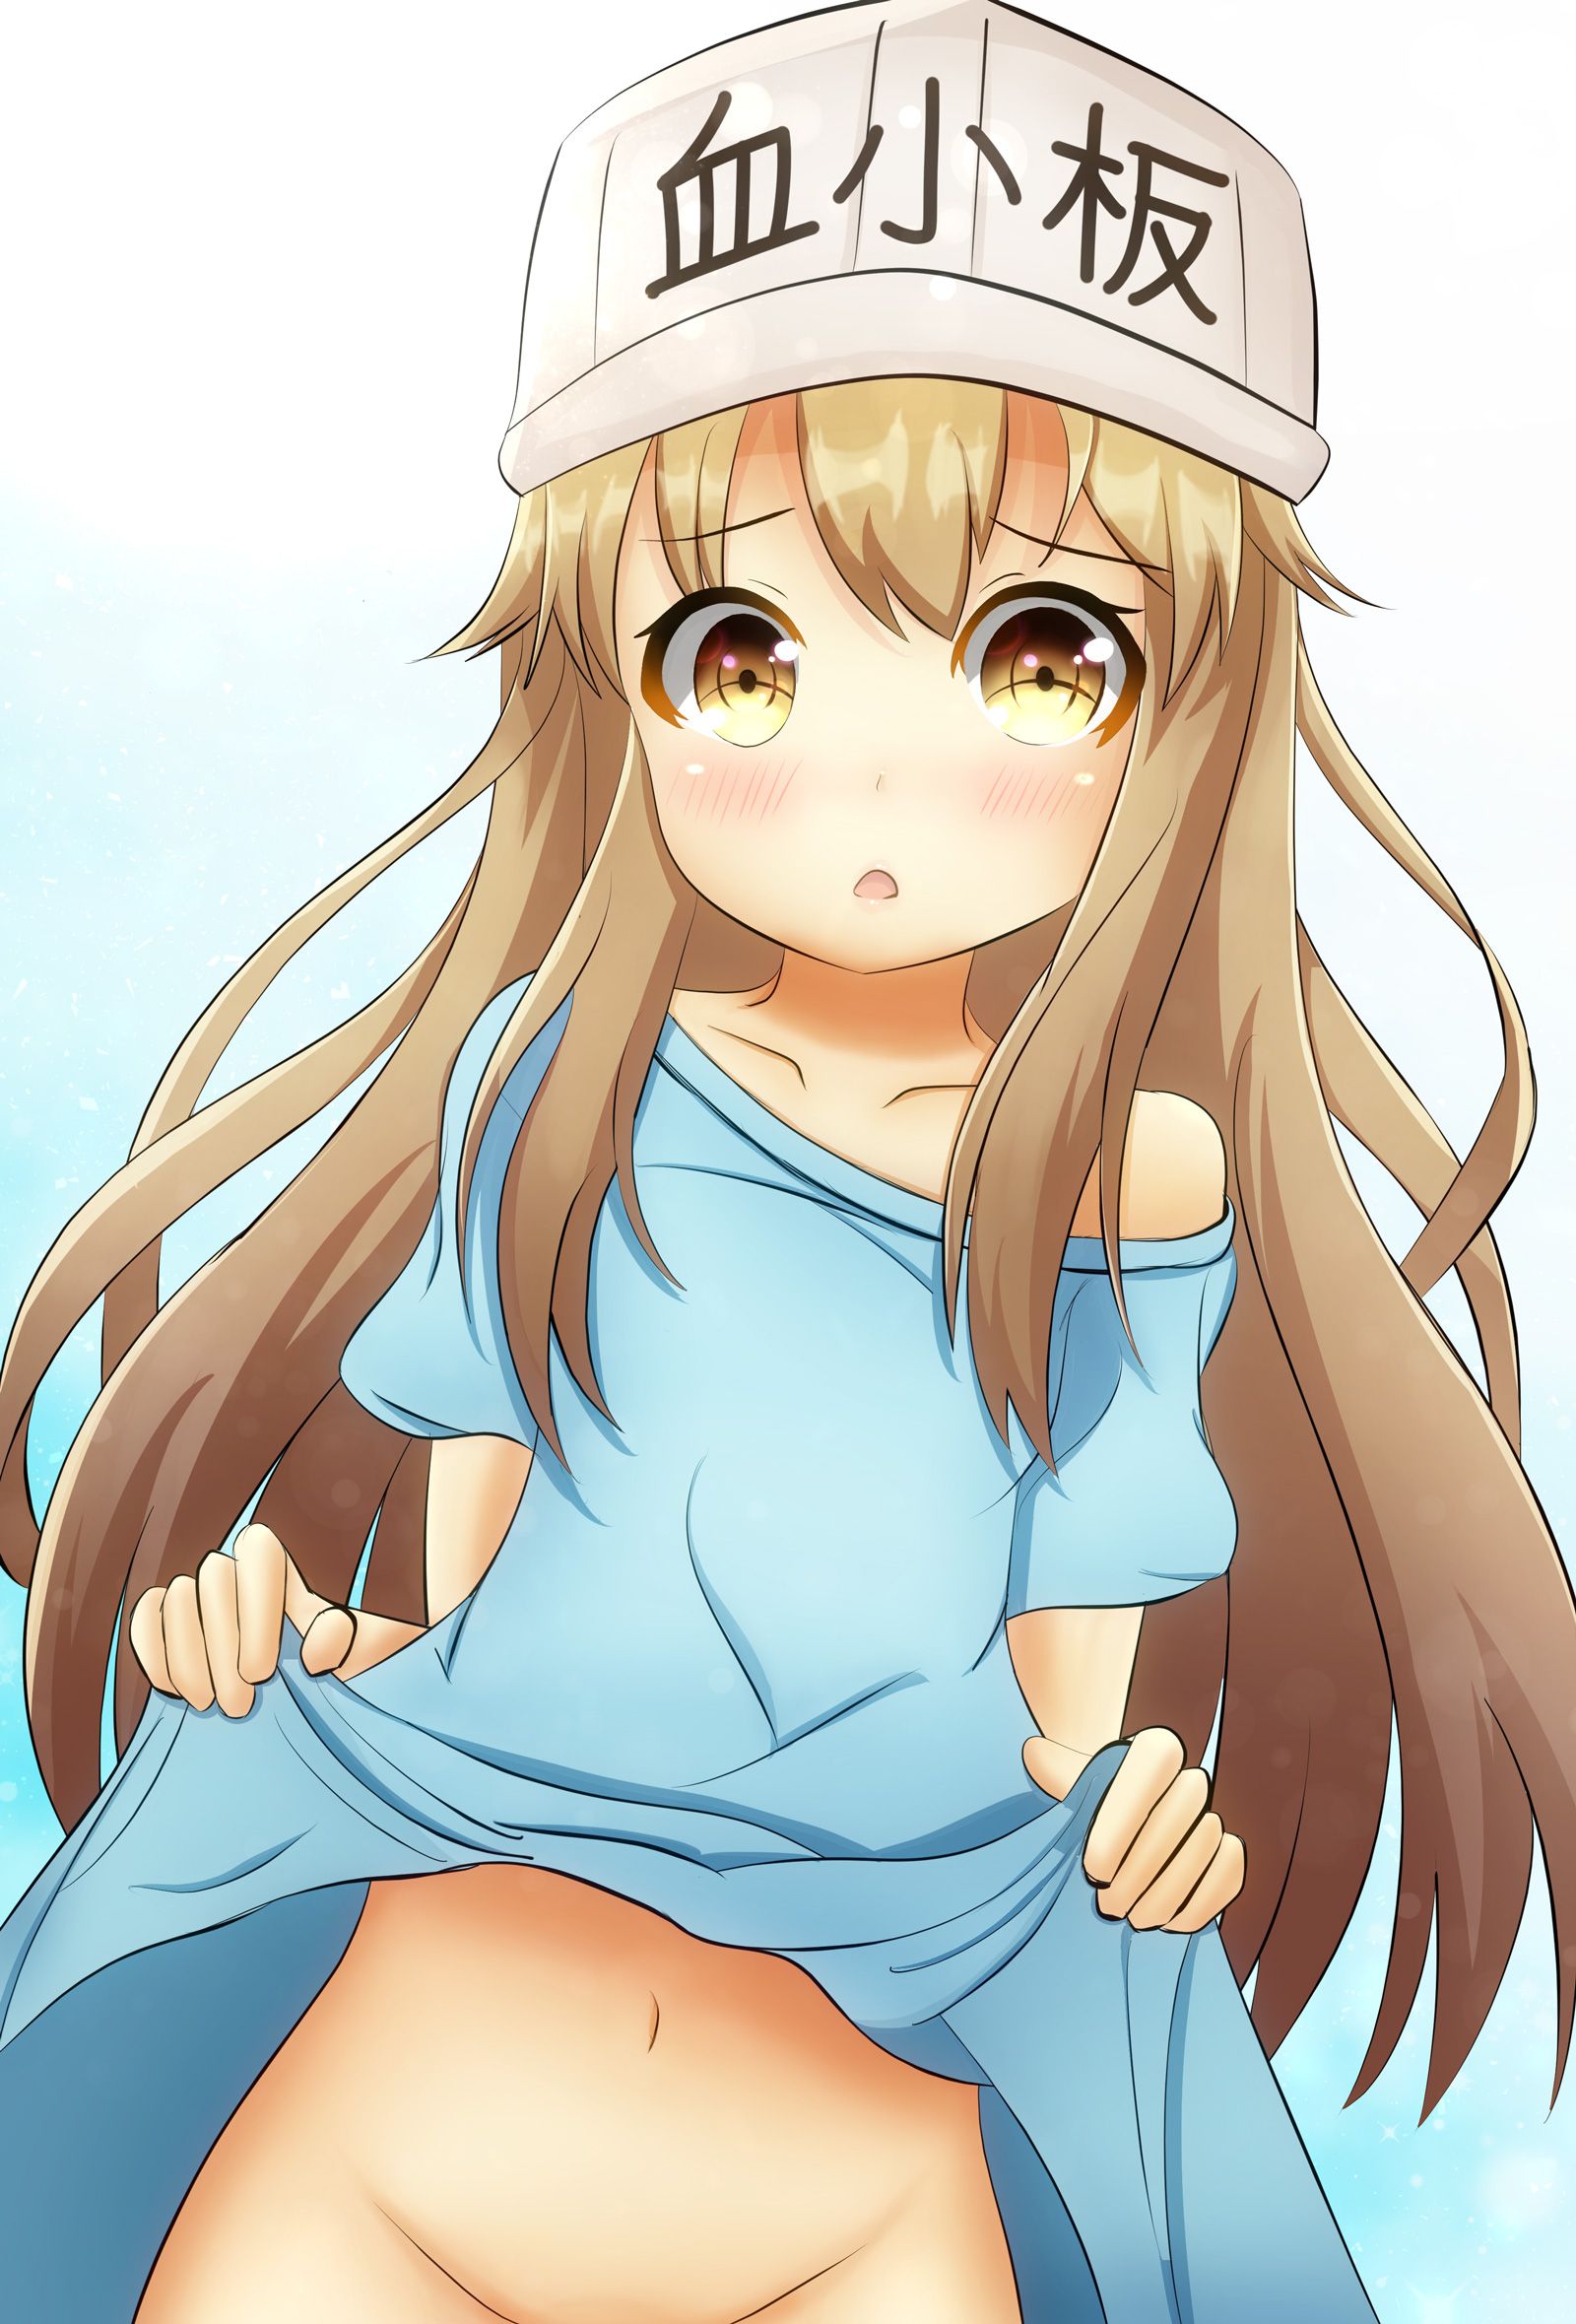 [Working cells] secondary images of platelets 1 60 sheets [ero/non-erotic] 57